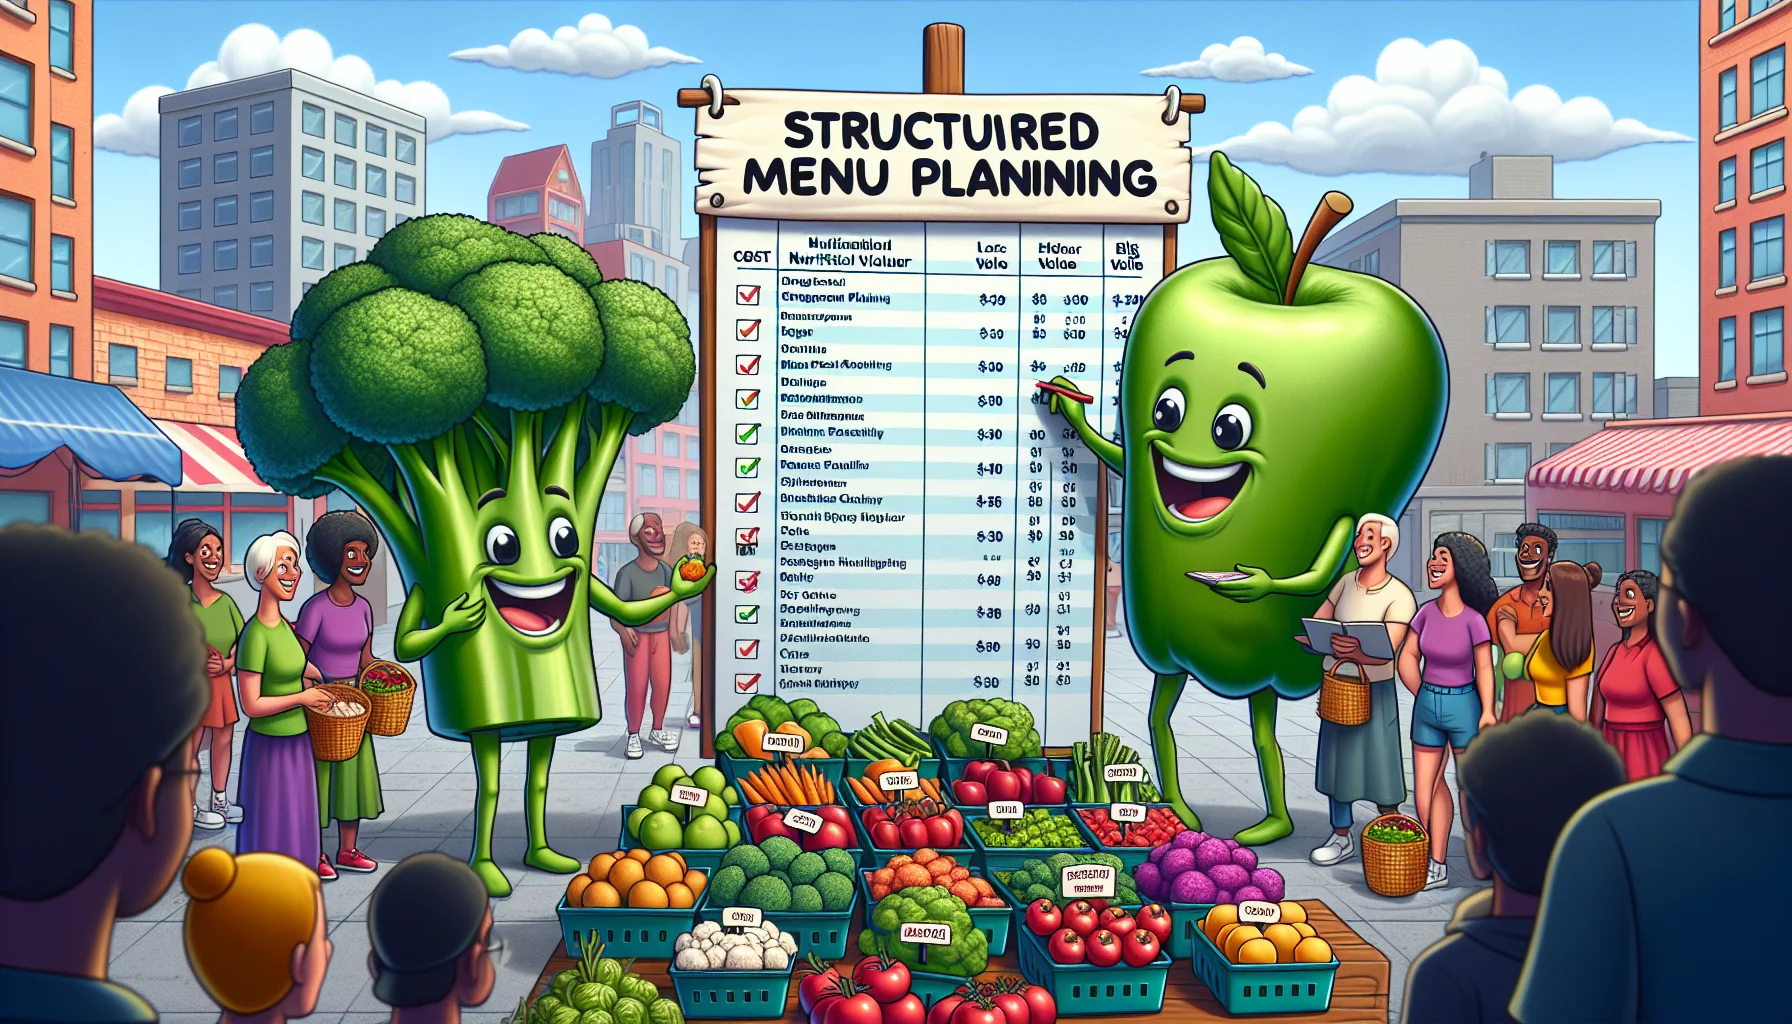 Visualize an amusing scenario revolving around Structured Menu Planning with the aim of promoting healthy eating for less budget. Imagine a colorful, lively outdoor fresh produce market. In the foreground, there's an animated pair of broccoli and apple characters with grinning faces, checking off items on a big sheet titled 'Structured Menu Planning'. In the background, there are cost and nutritional value placards next to all items. The colorful veggies and fruits look delectable leading to a growing line of diverse people of different descents such as Caucasian, Asian, Middle-Eastern, smiling and filling their baskets eagerly, appreciating the approach to affordable, healthy eating.